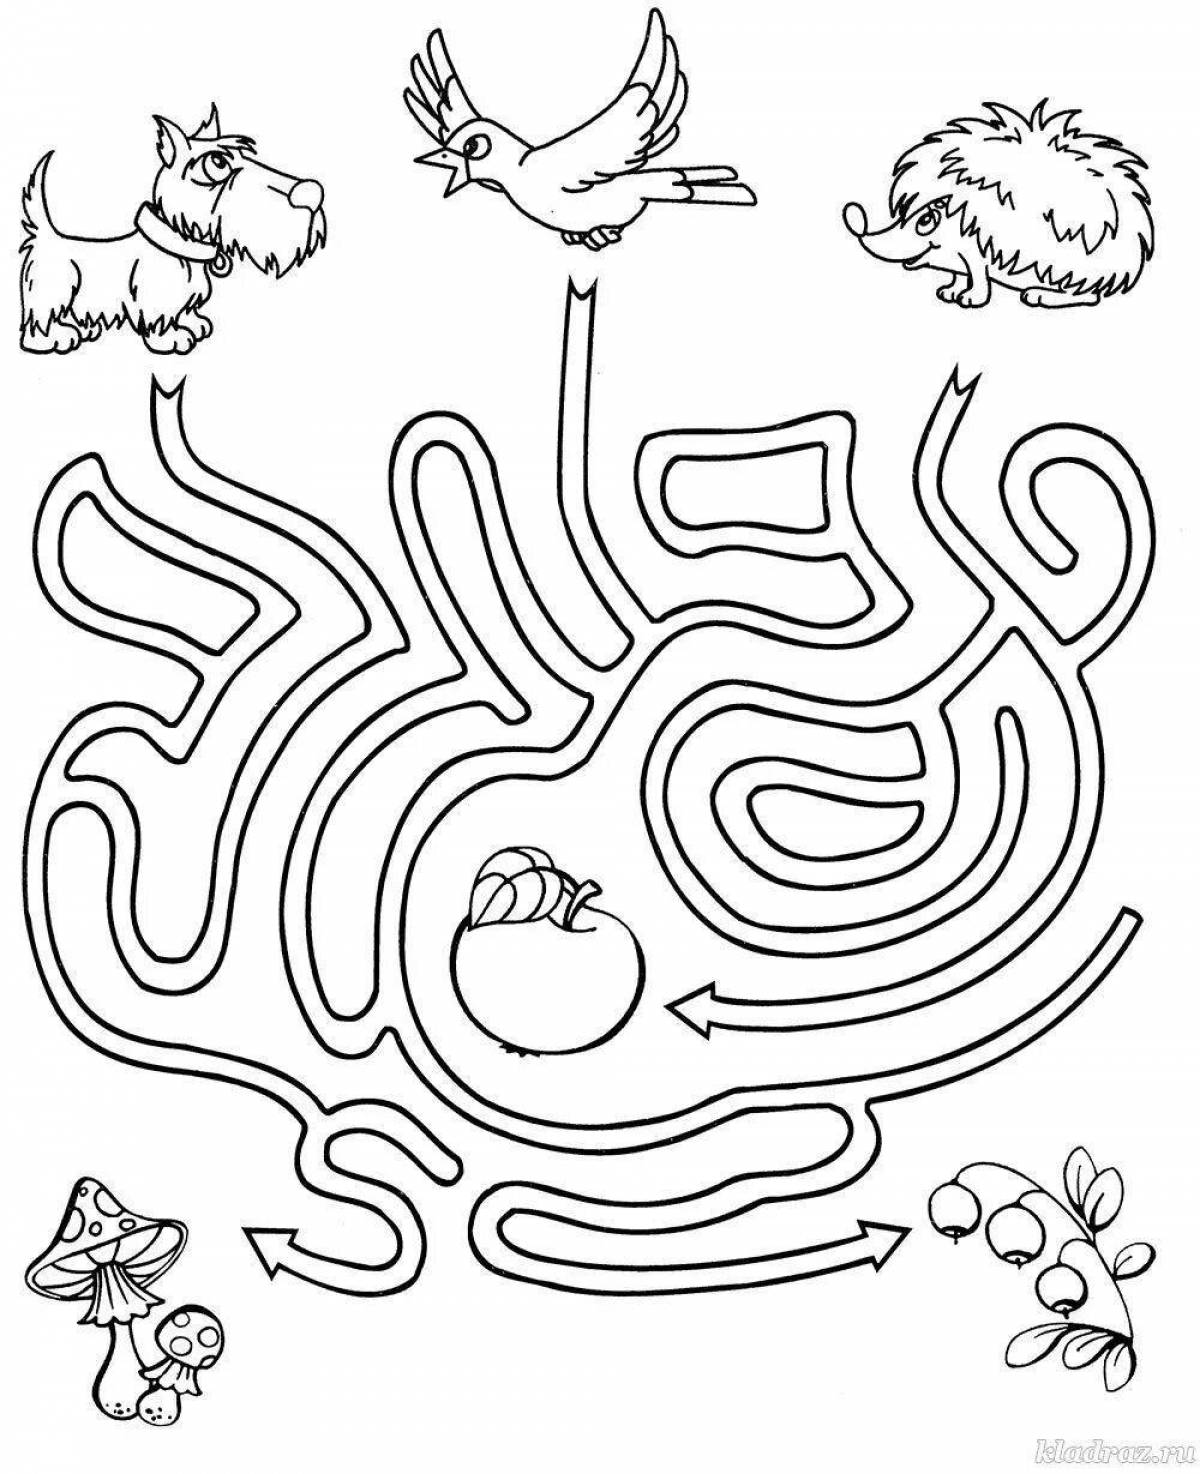 Interactive coloring games for 3-4 year olds